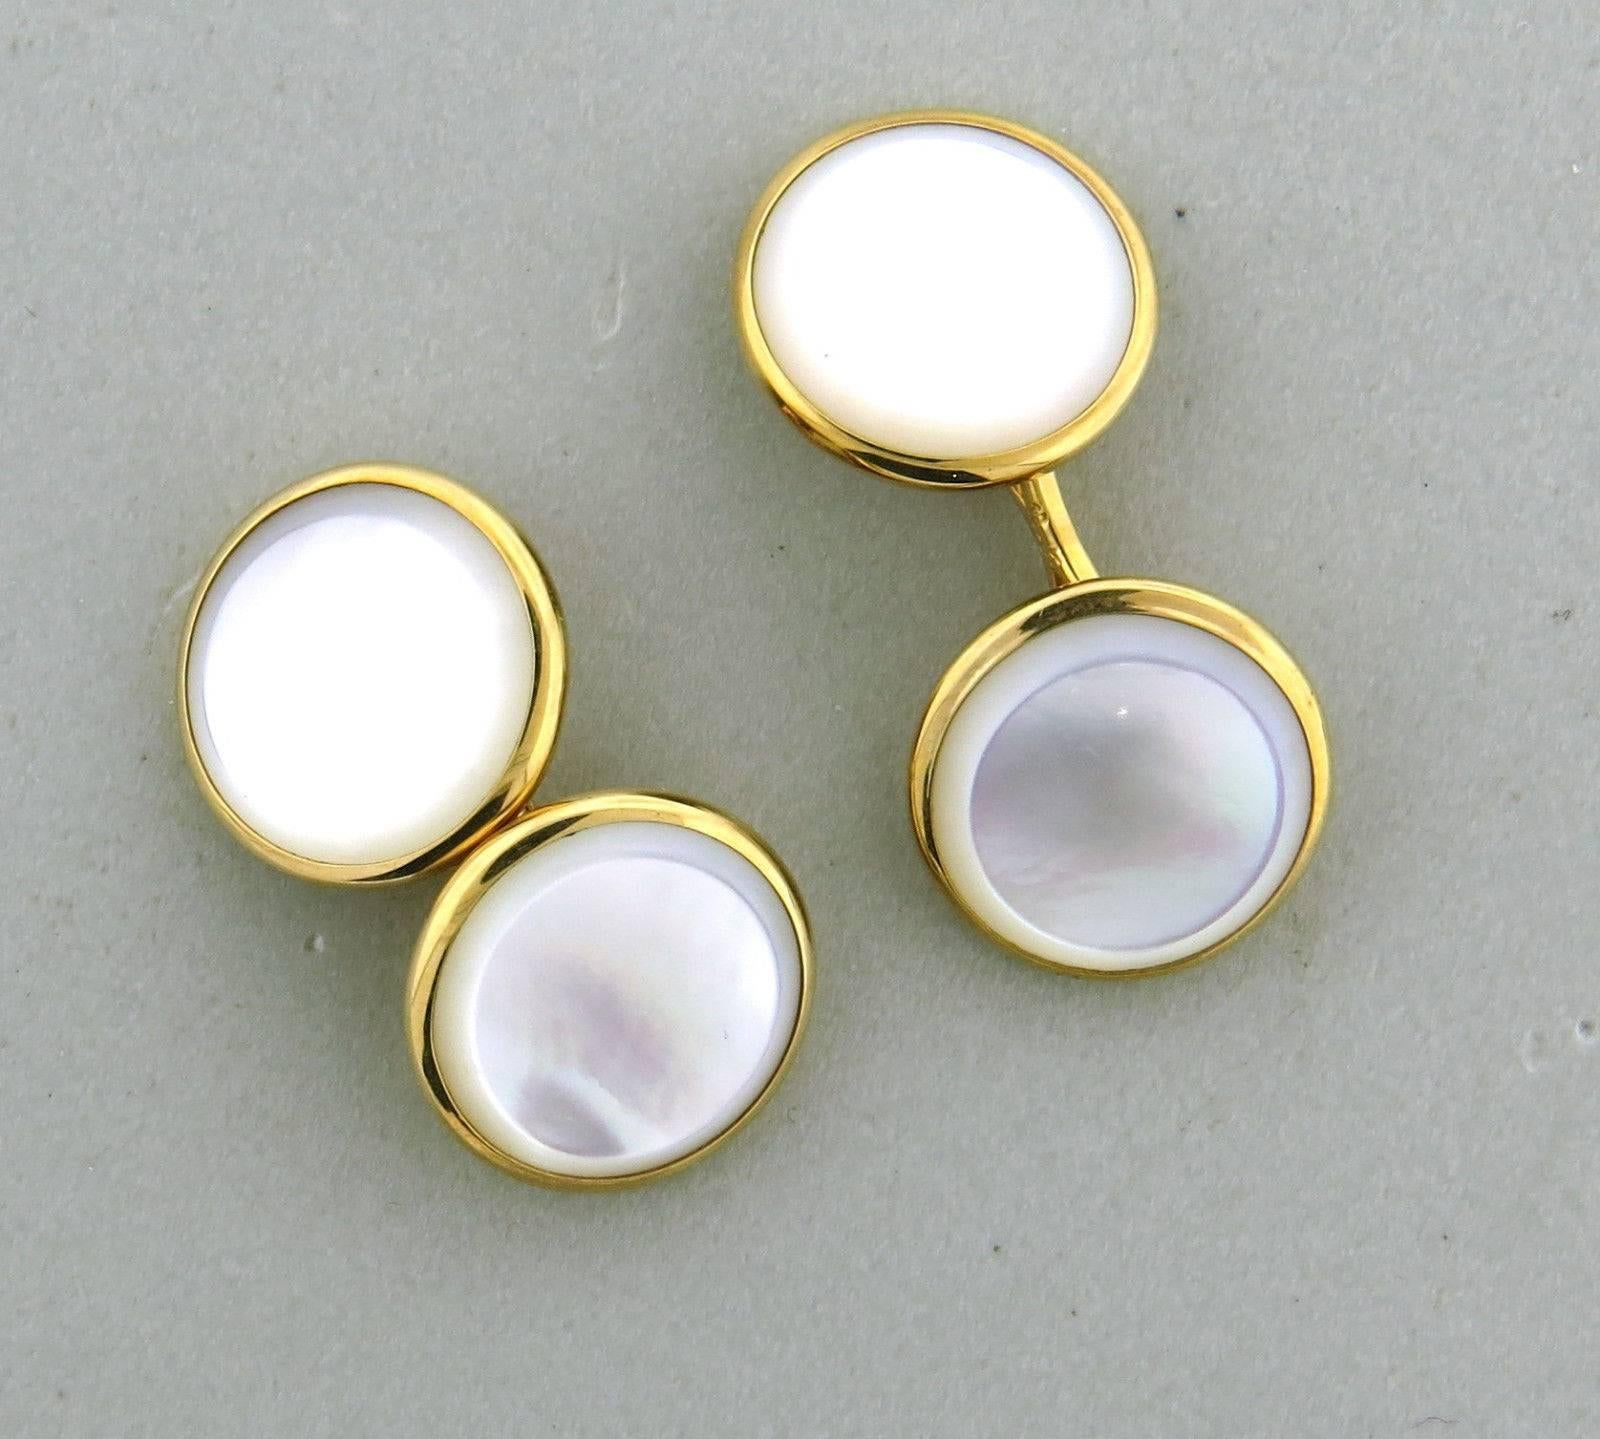 A set of 14k yellow gold cufflinks and studs adorned with mother of pearl.  Crafted by Brooks Brothers, the cufflinks measure 14mm in diameter, while the studs measure 8mm. Brooks Brothers, 14k.  The weight of the set is 9.5 grams.